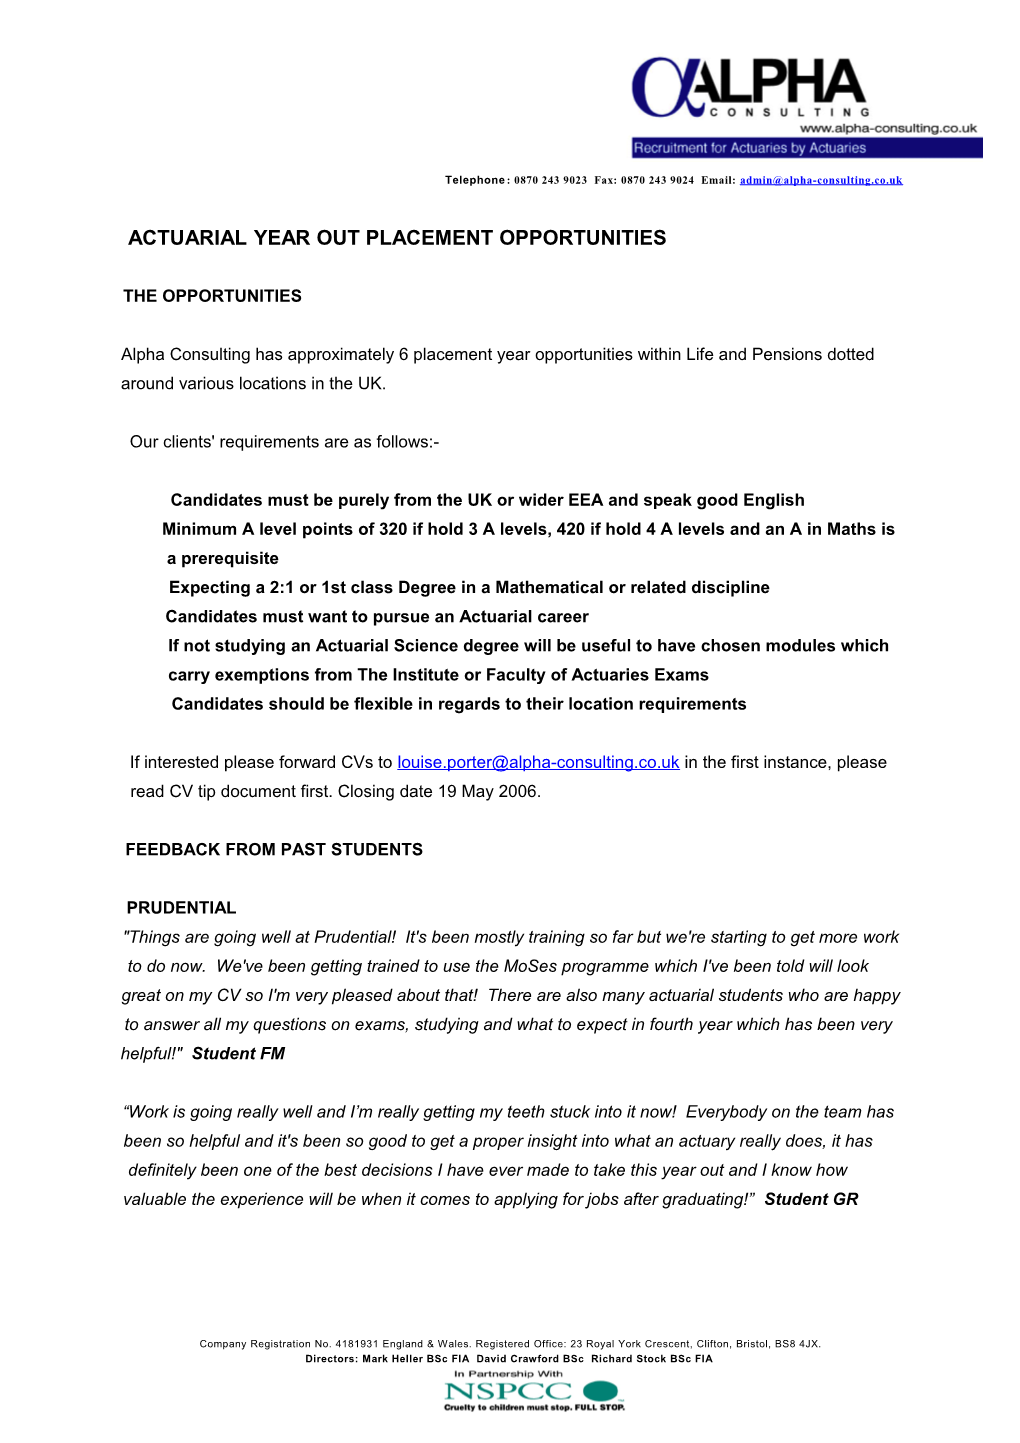 Actuarial Year out Placement Opportunities